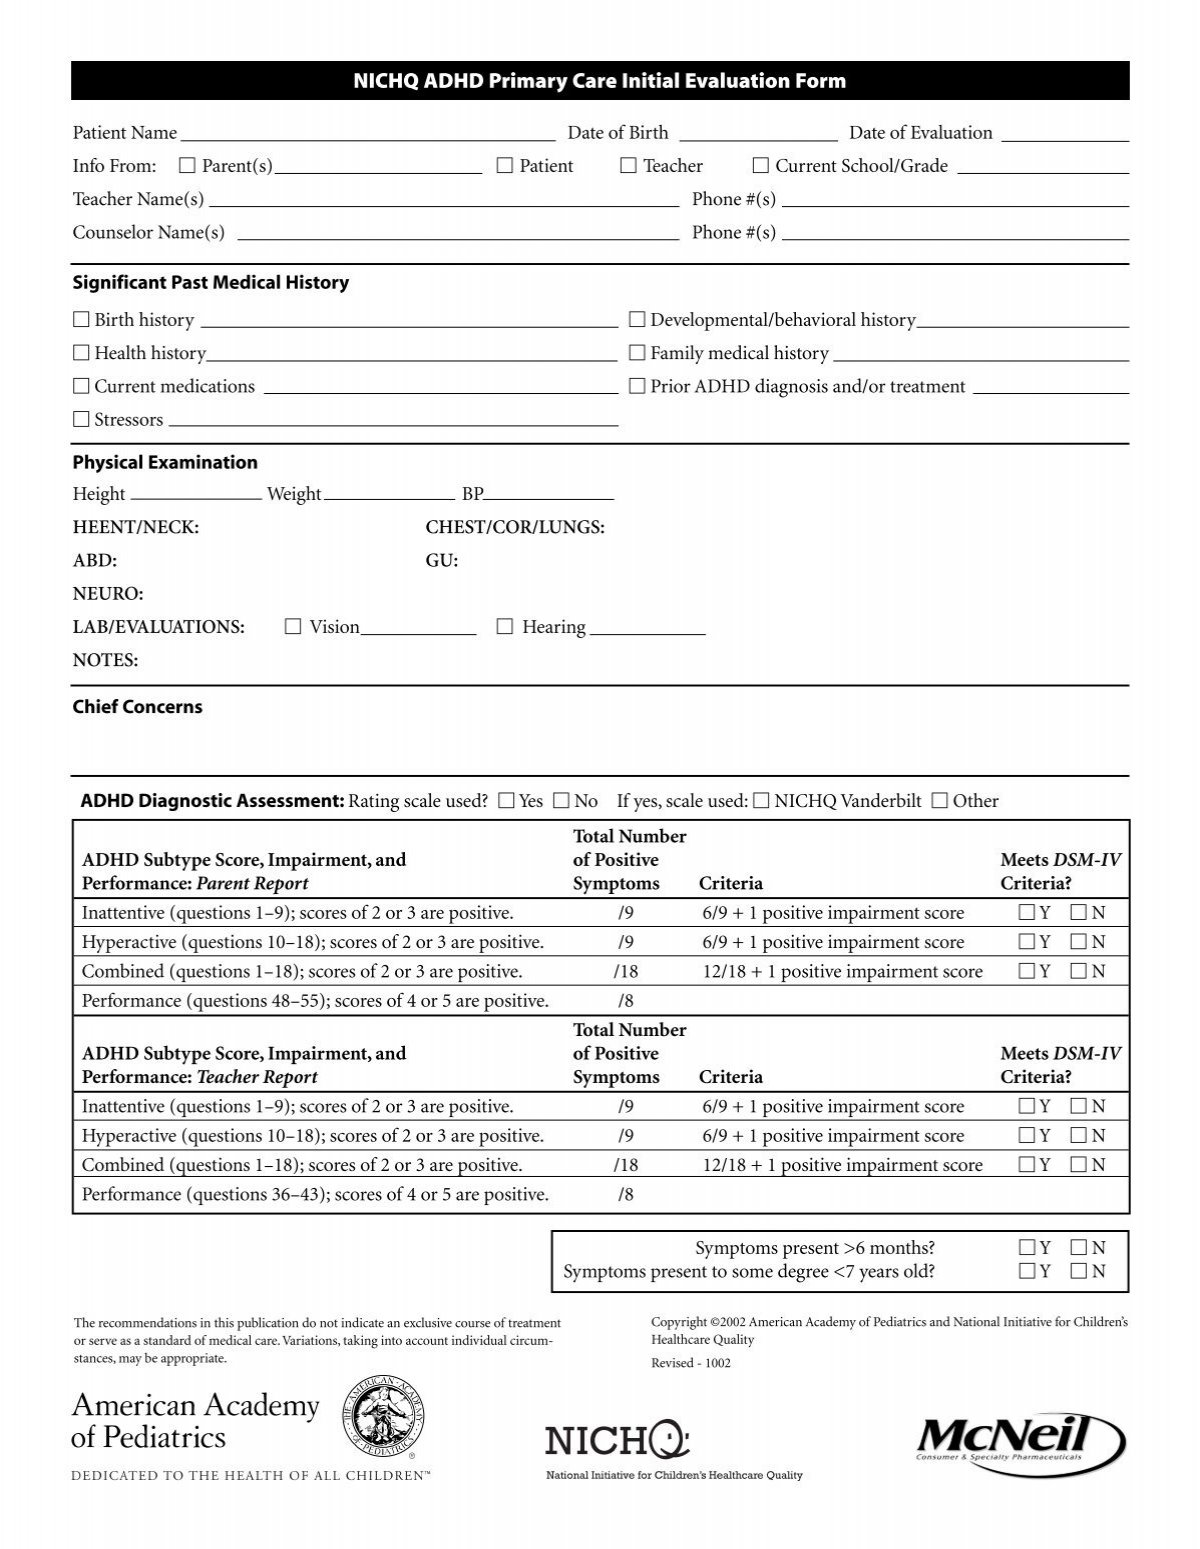 nichq-adhd-primary-care-initial-evaluation-form